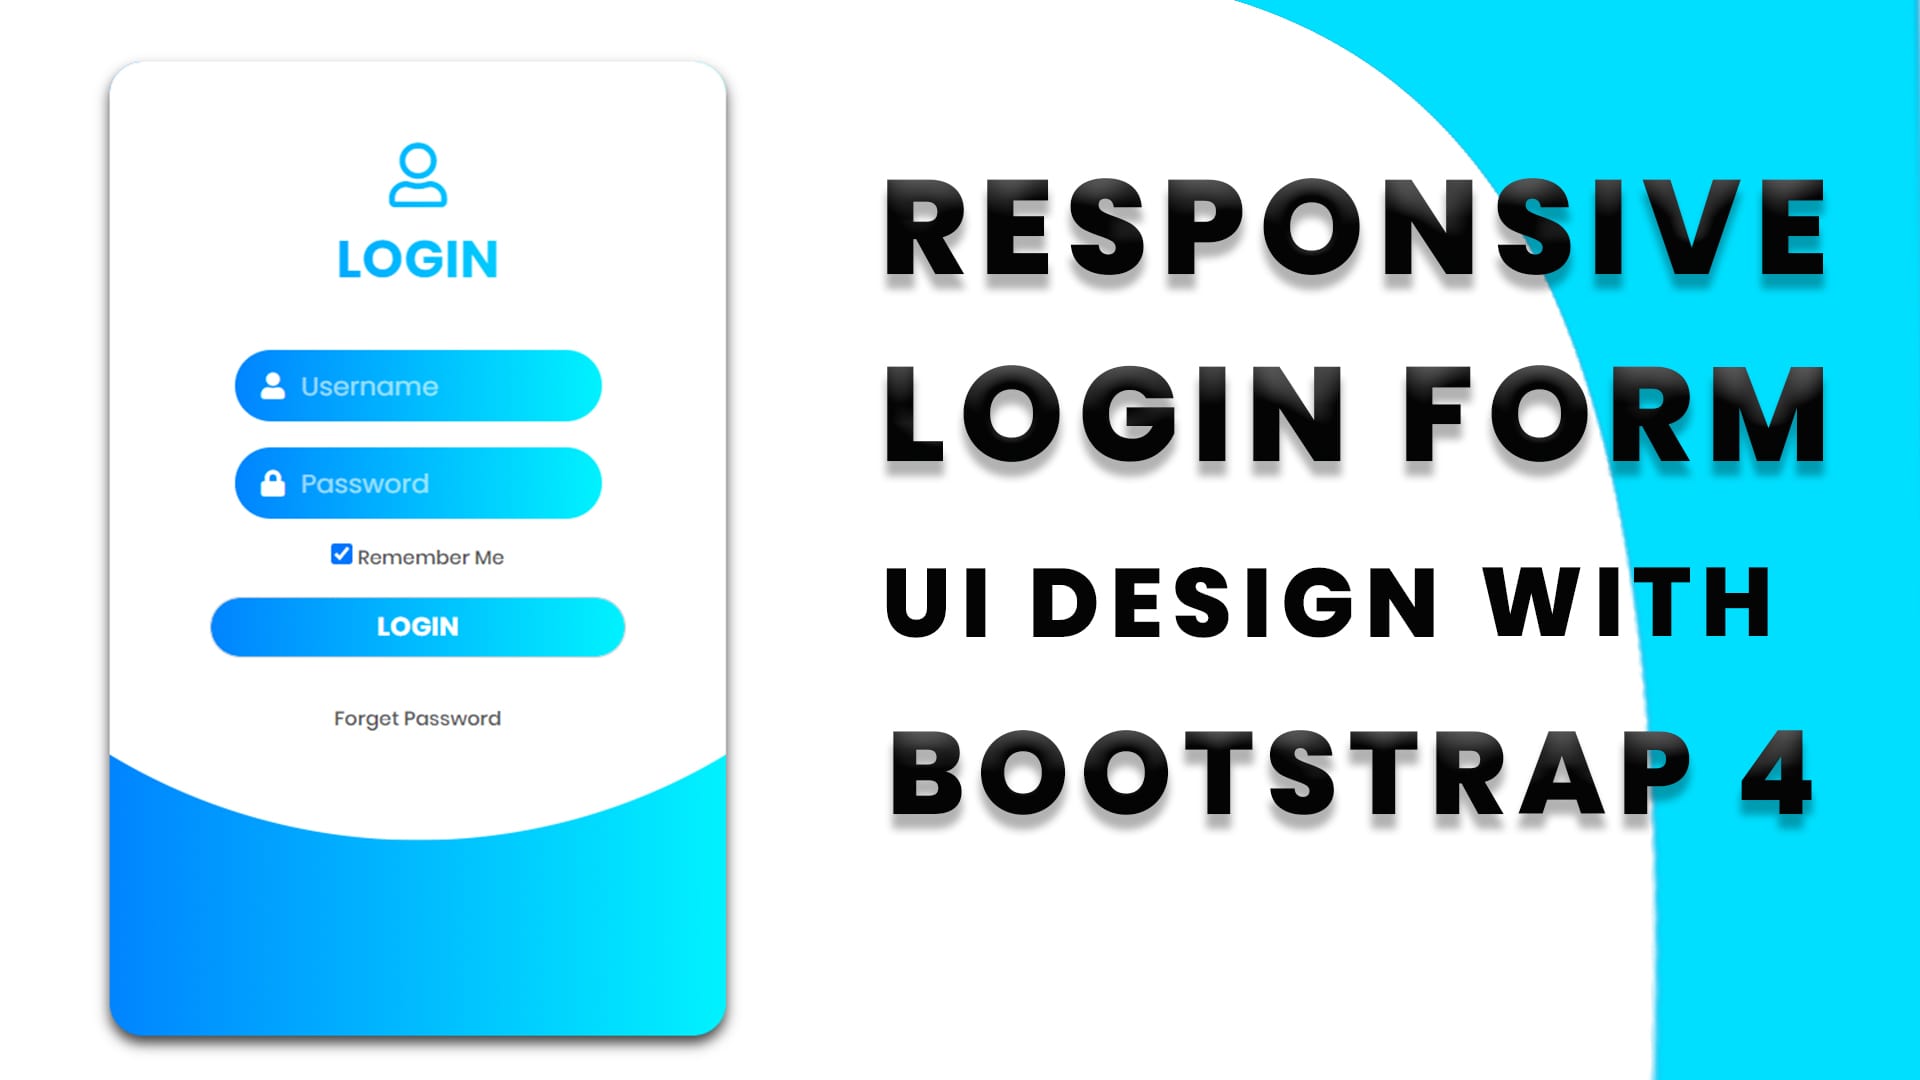 bootstrap-5-login-page-template-example-bootstrapbrain